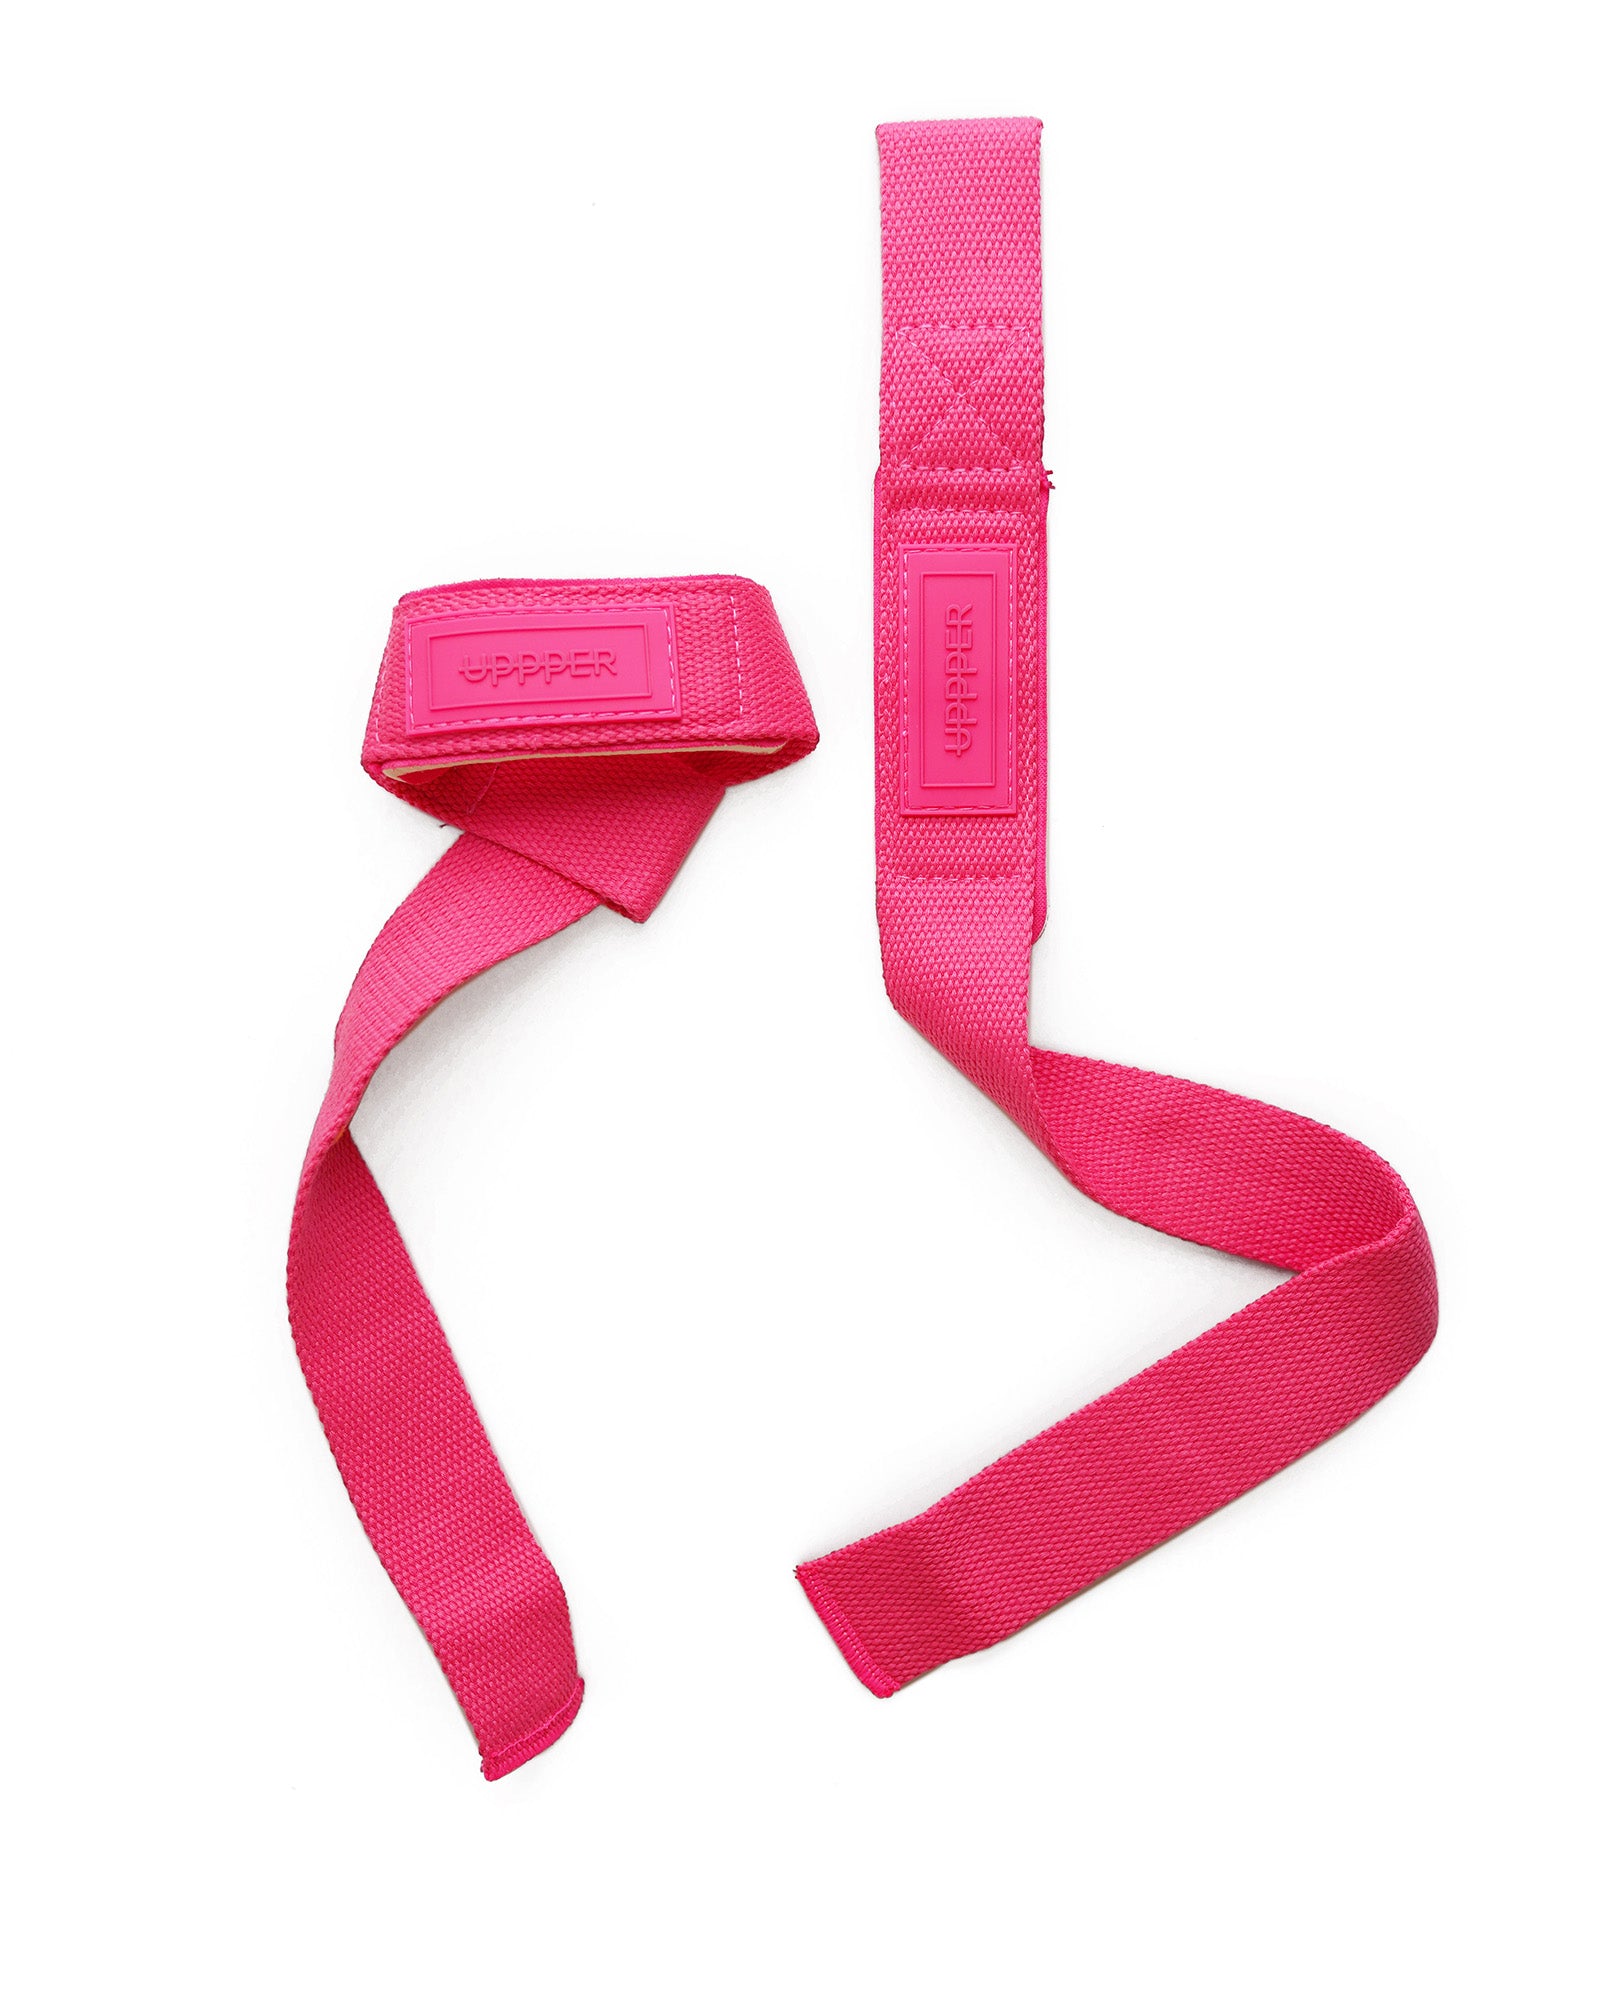 uppper lifting straps neon pink